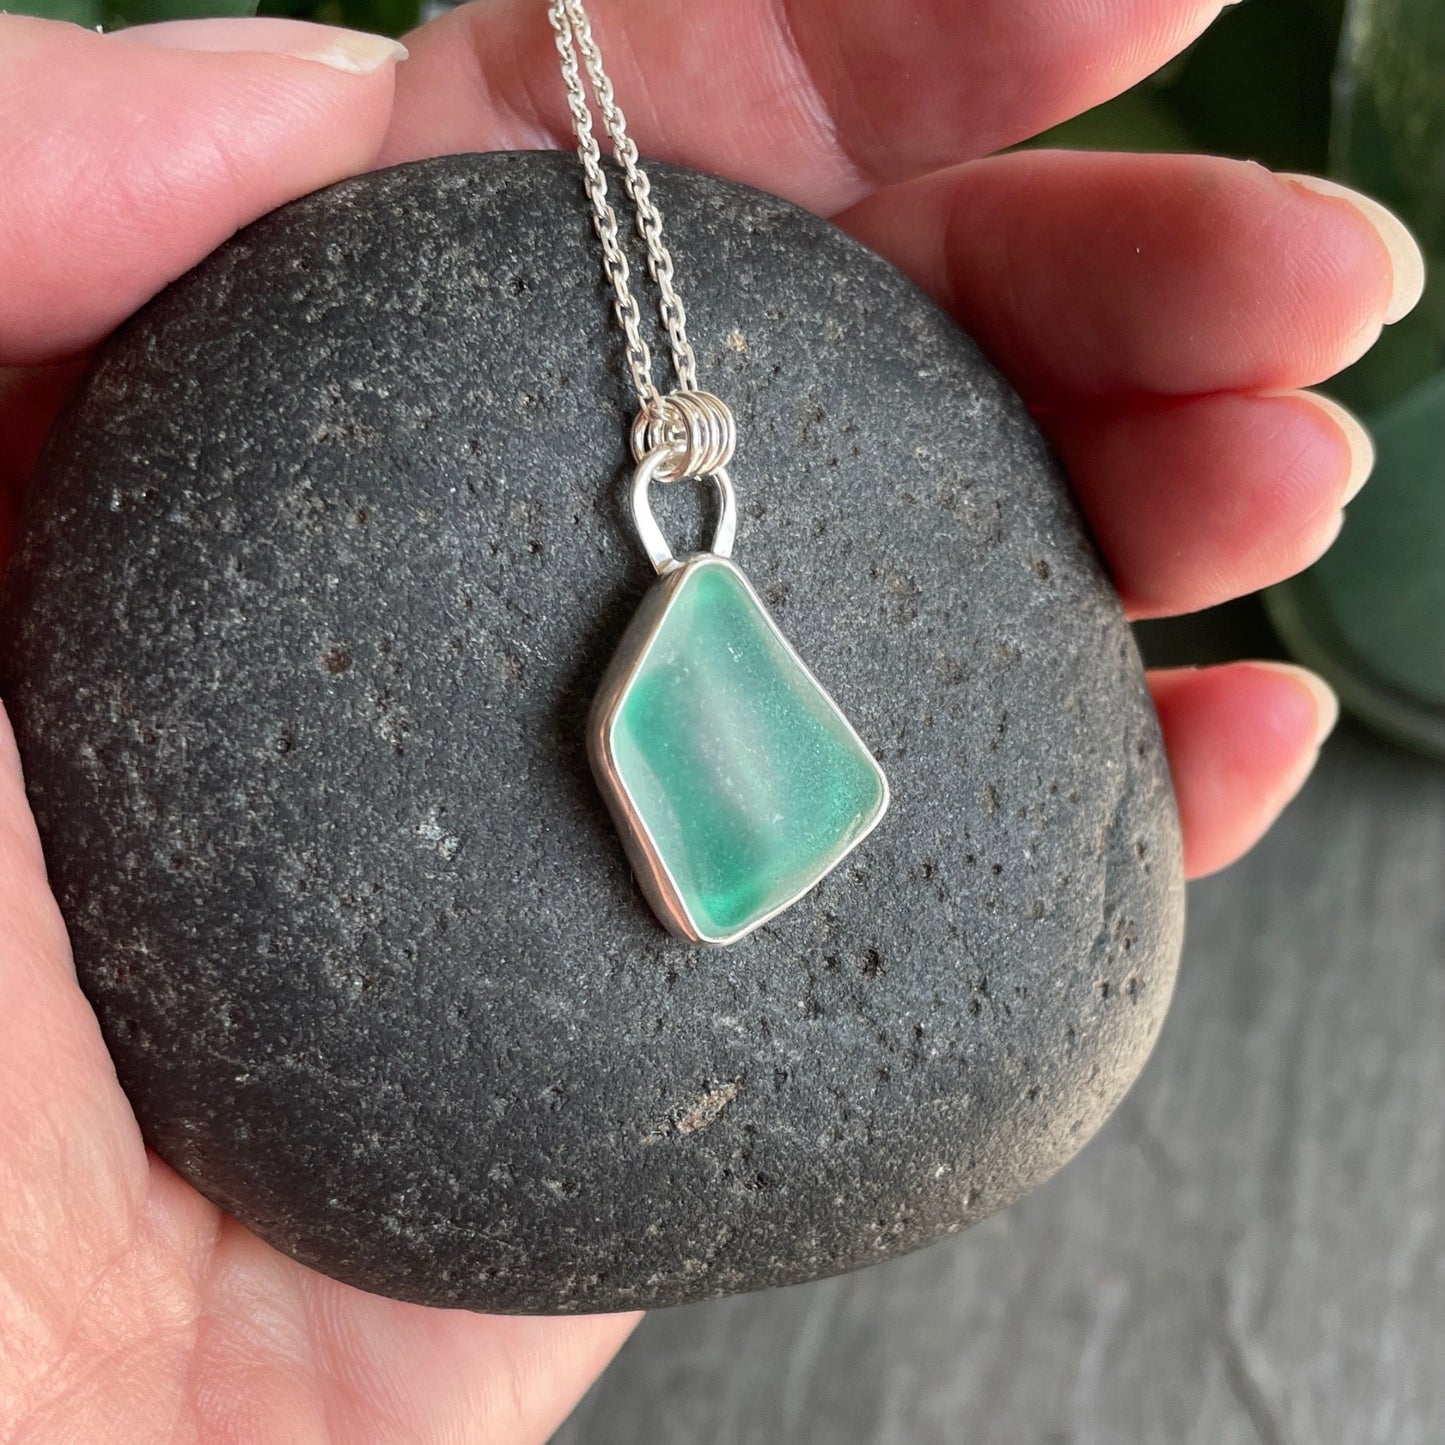 Rare Green and White Sea Glass Necklace - AccentYourself